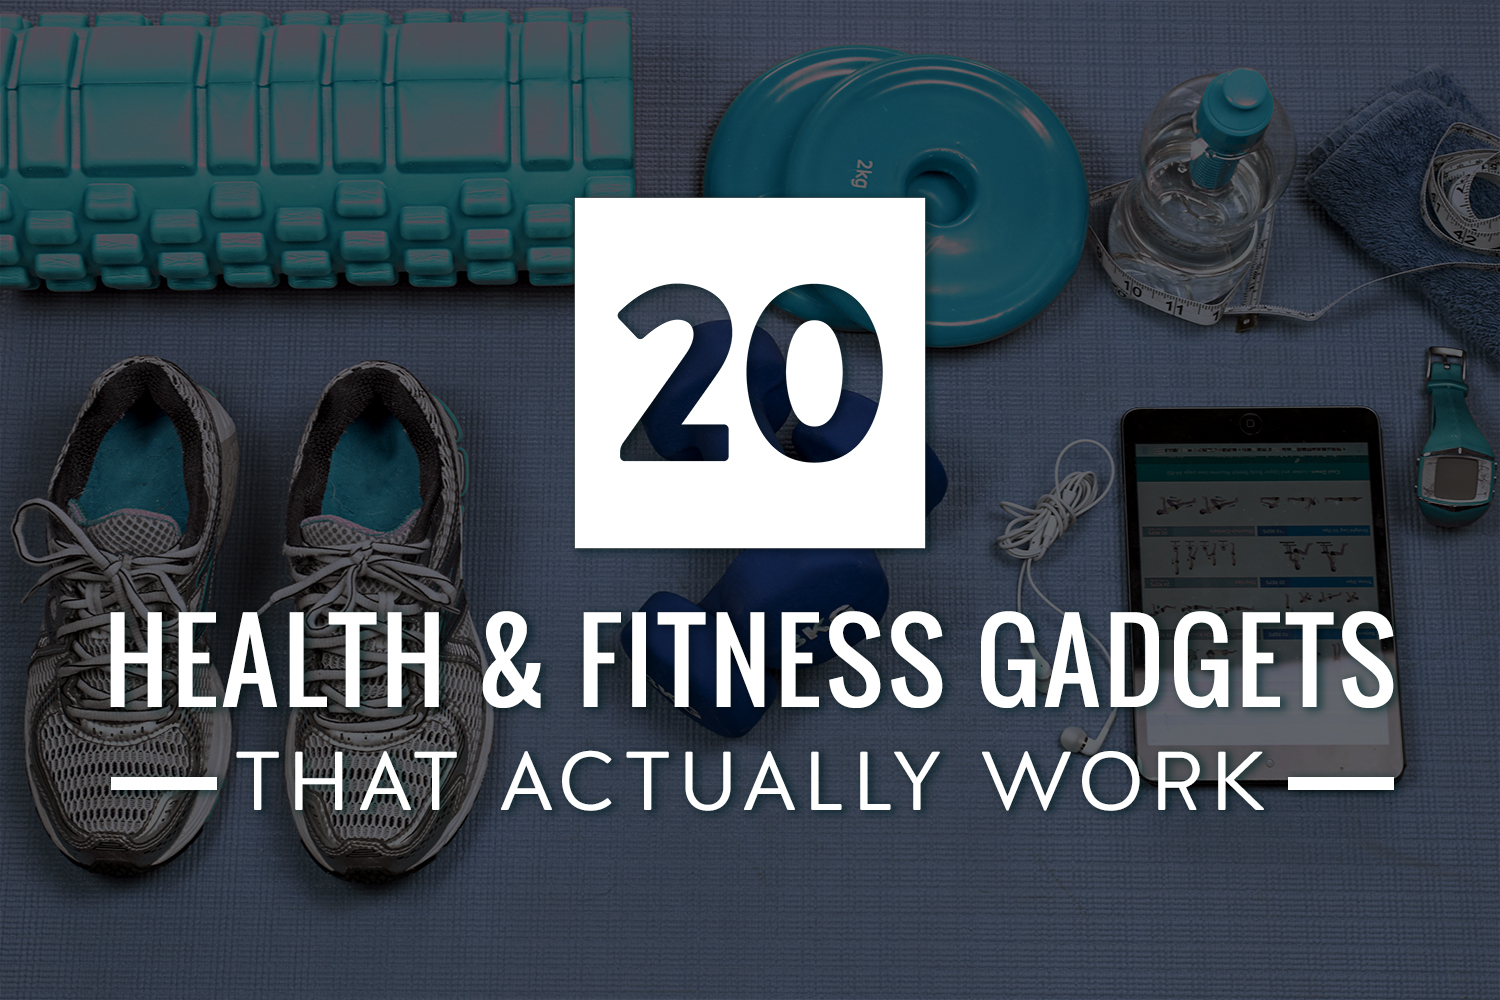 20 Health & Fitness Gadgets That Actually Work